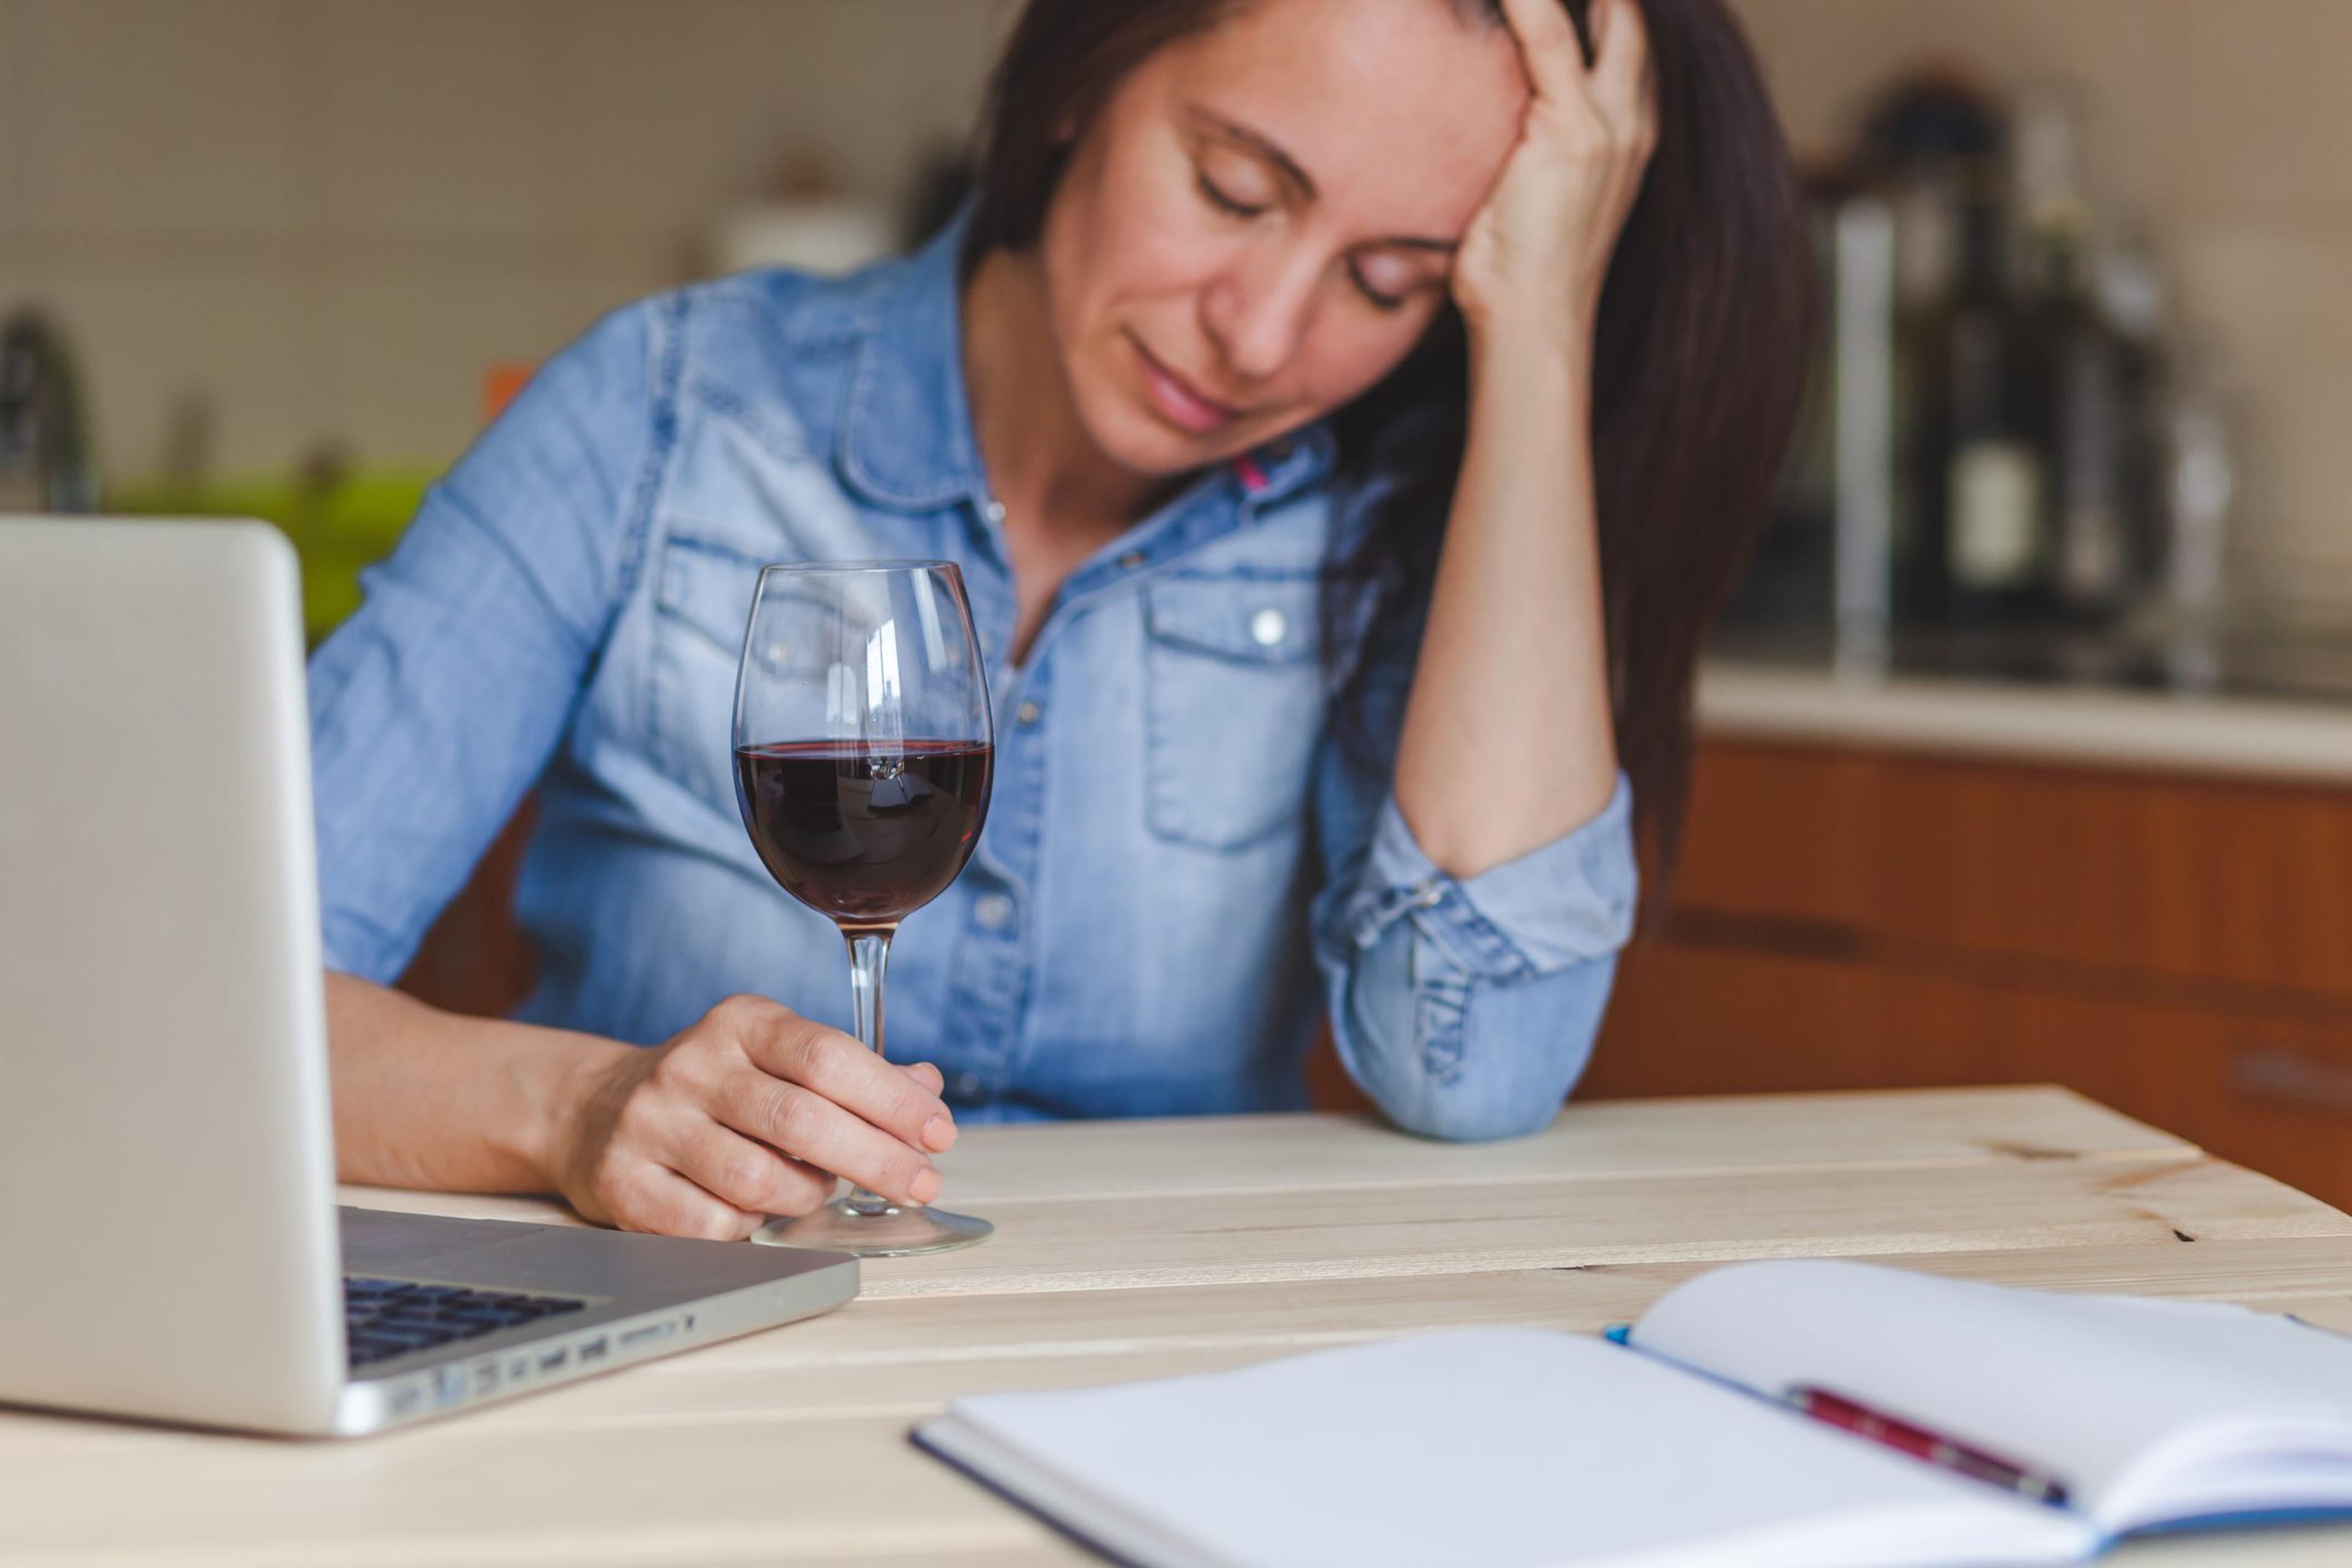 Overwhelmed, stressed woman sits with a glass of wine and her laptop